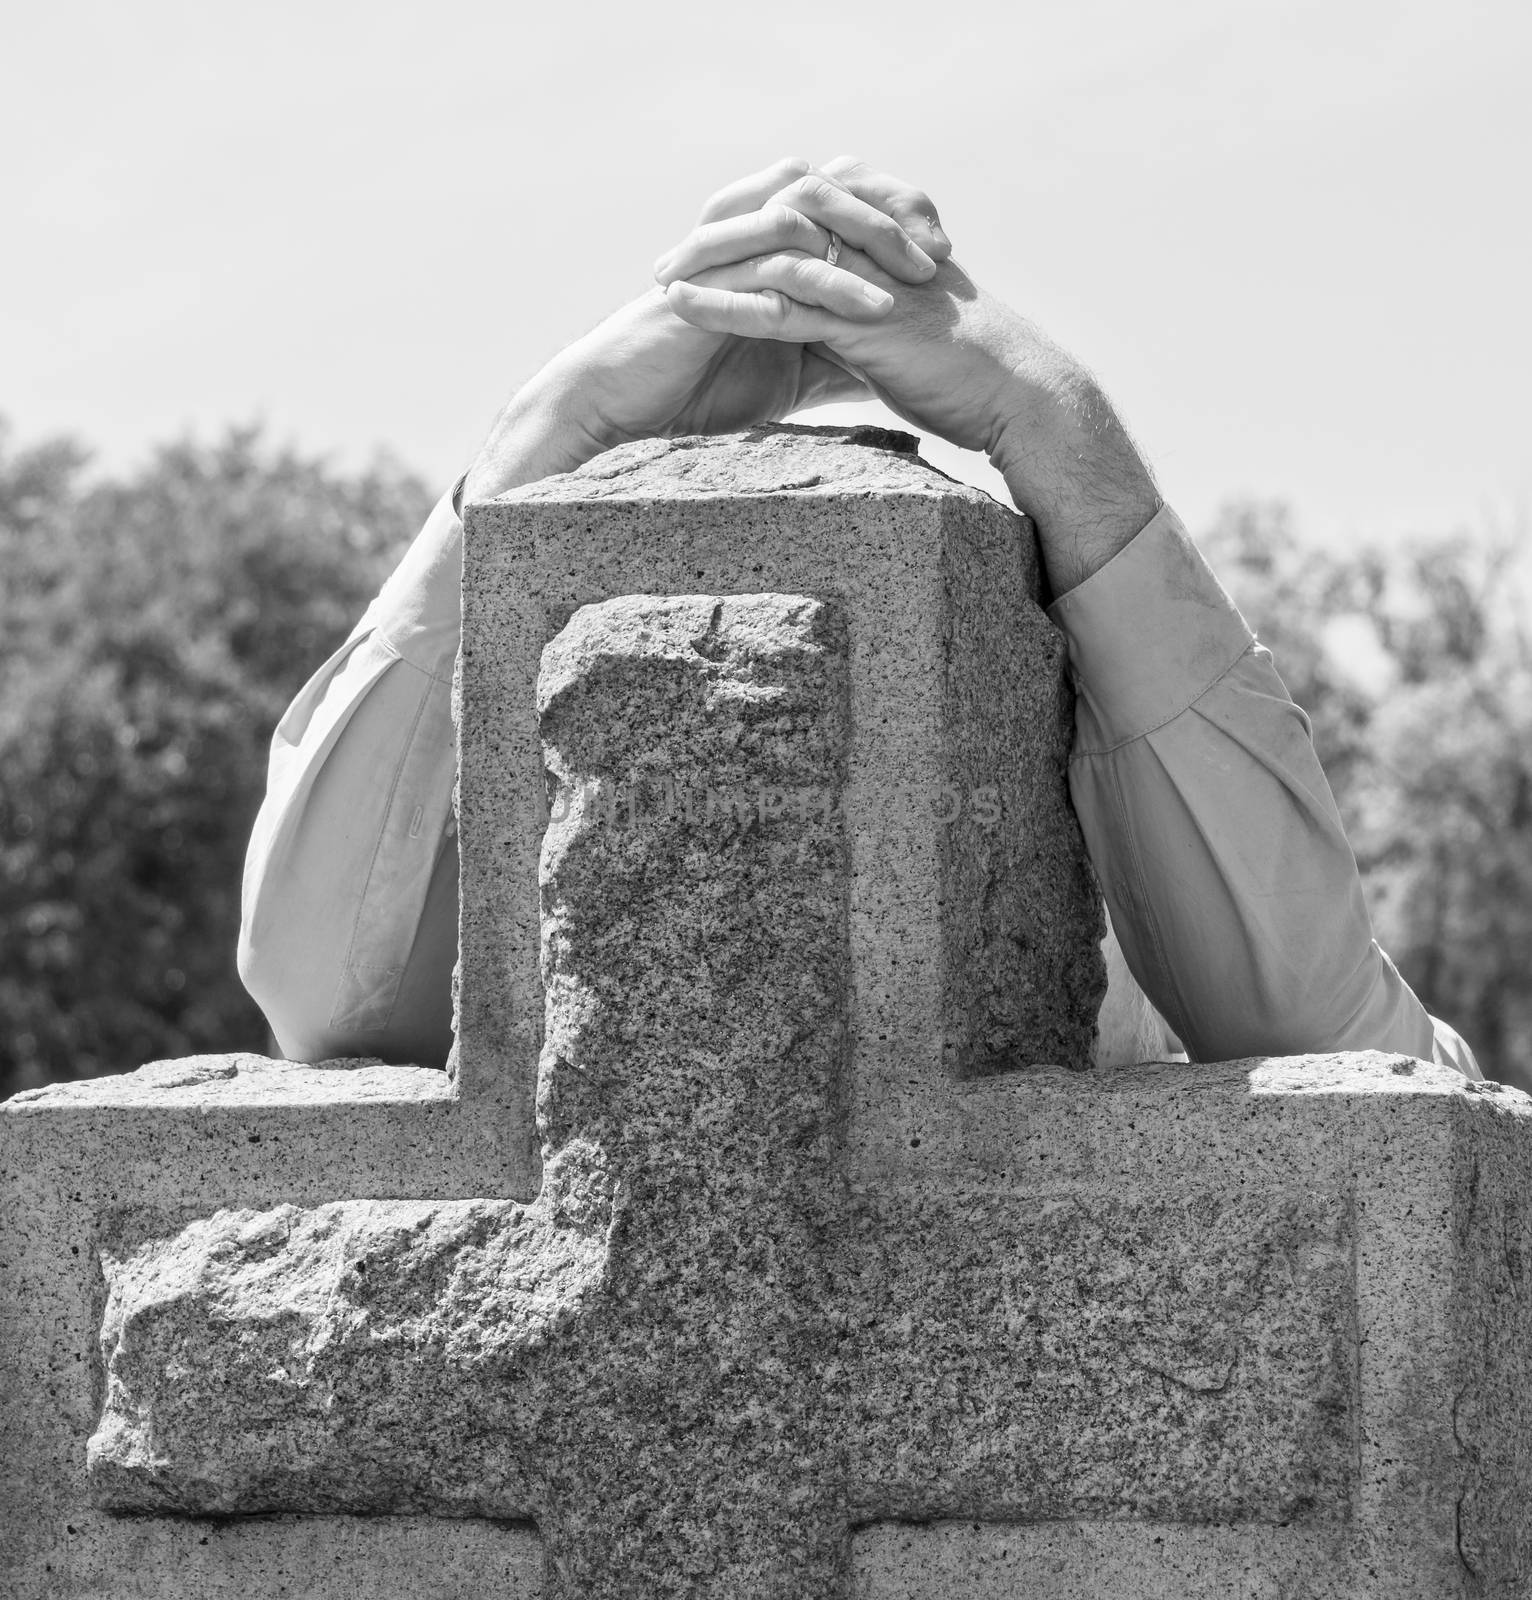 Black and white lone figure of person's hands grieving at cemetery